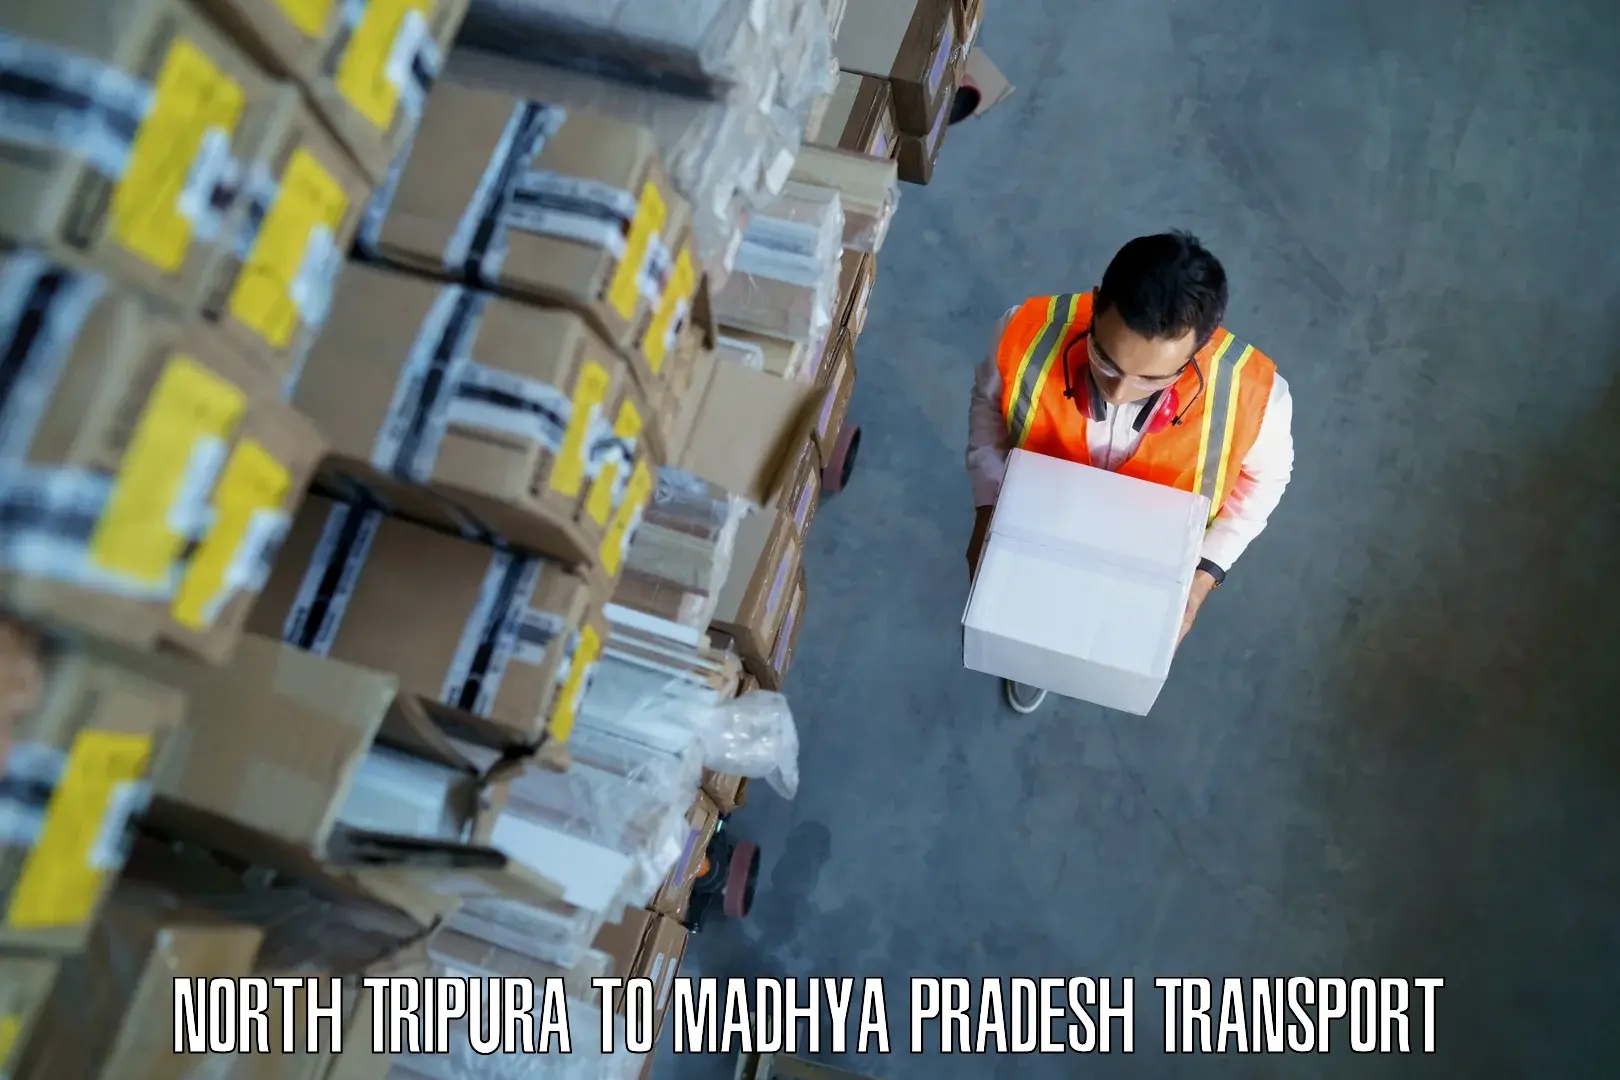 Road transport online services North Tripura to Jirapur